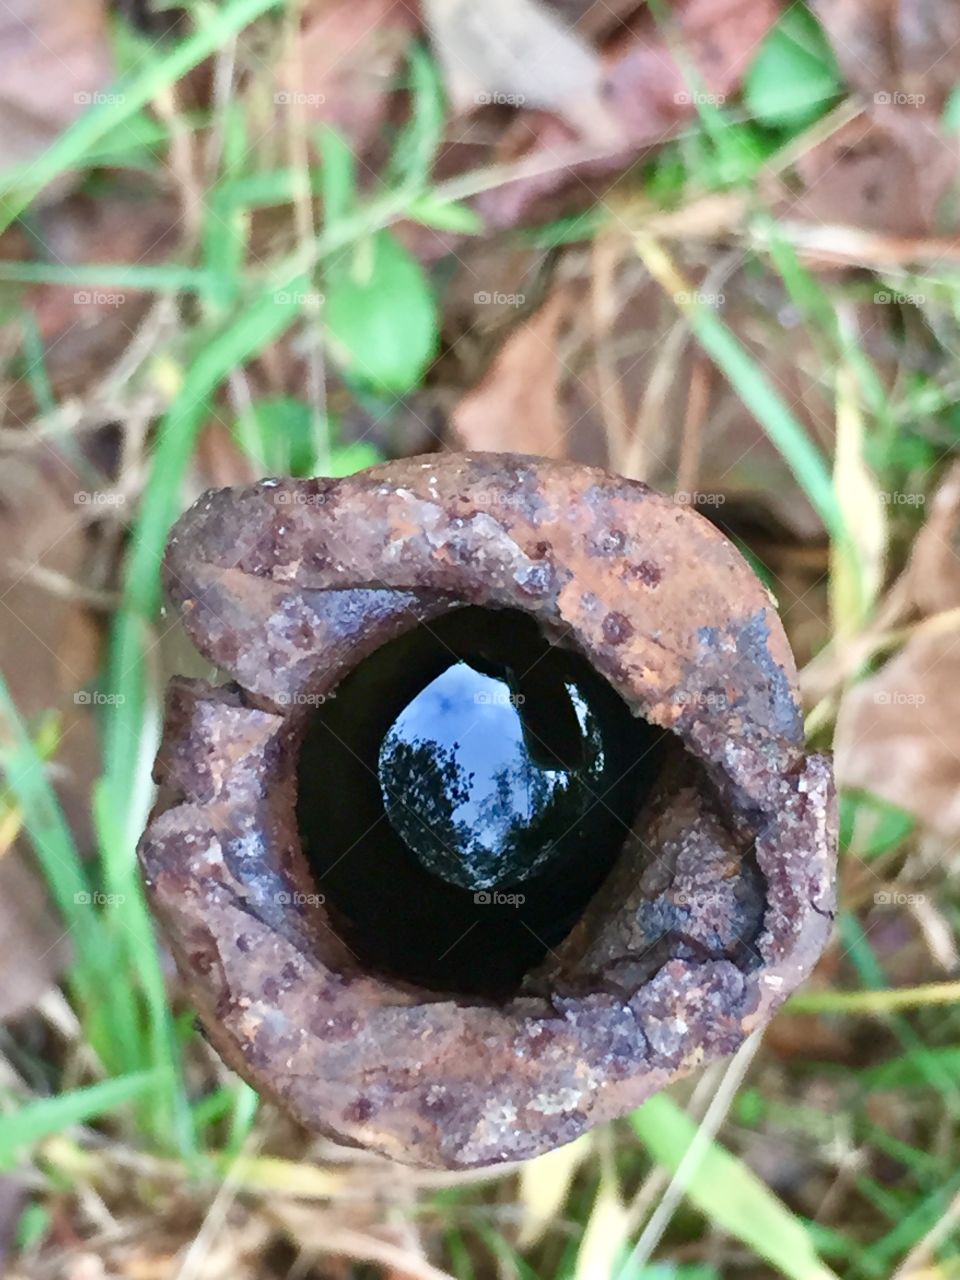 What is it? Can you figure it out? A marble maybe? Or it could be just a hollow piece of metal filled with rain water...used for tossing horseshoes.